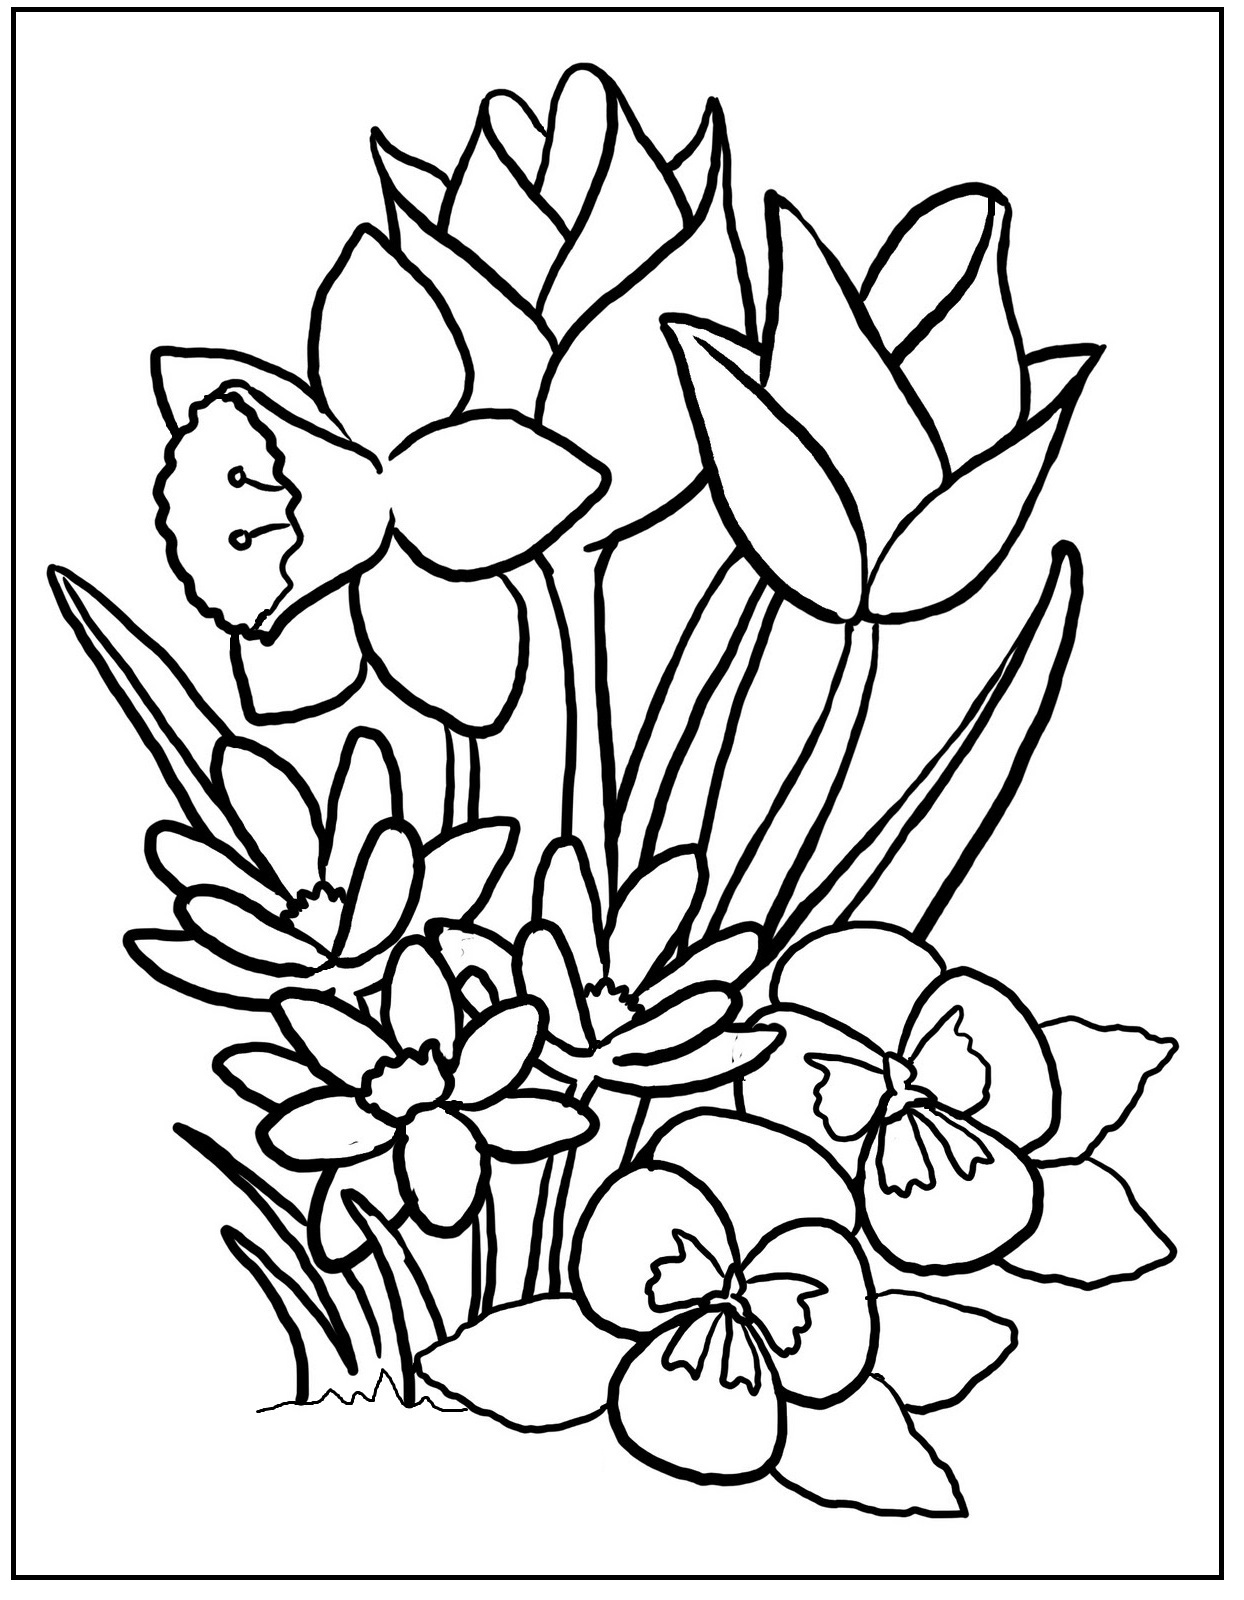 Flowers Coloring Pages Pdf At GetColorings Free Printable 